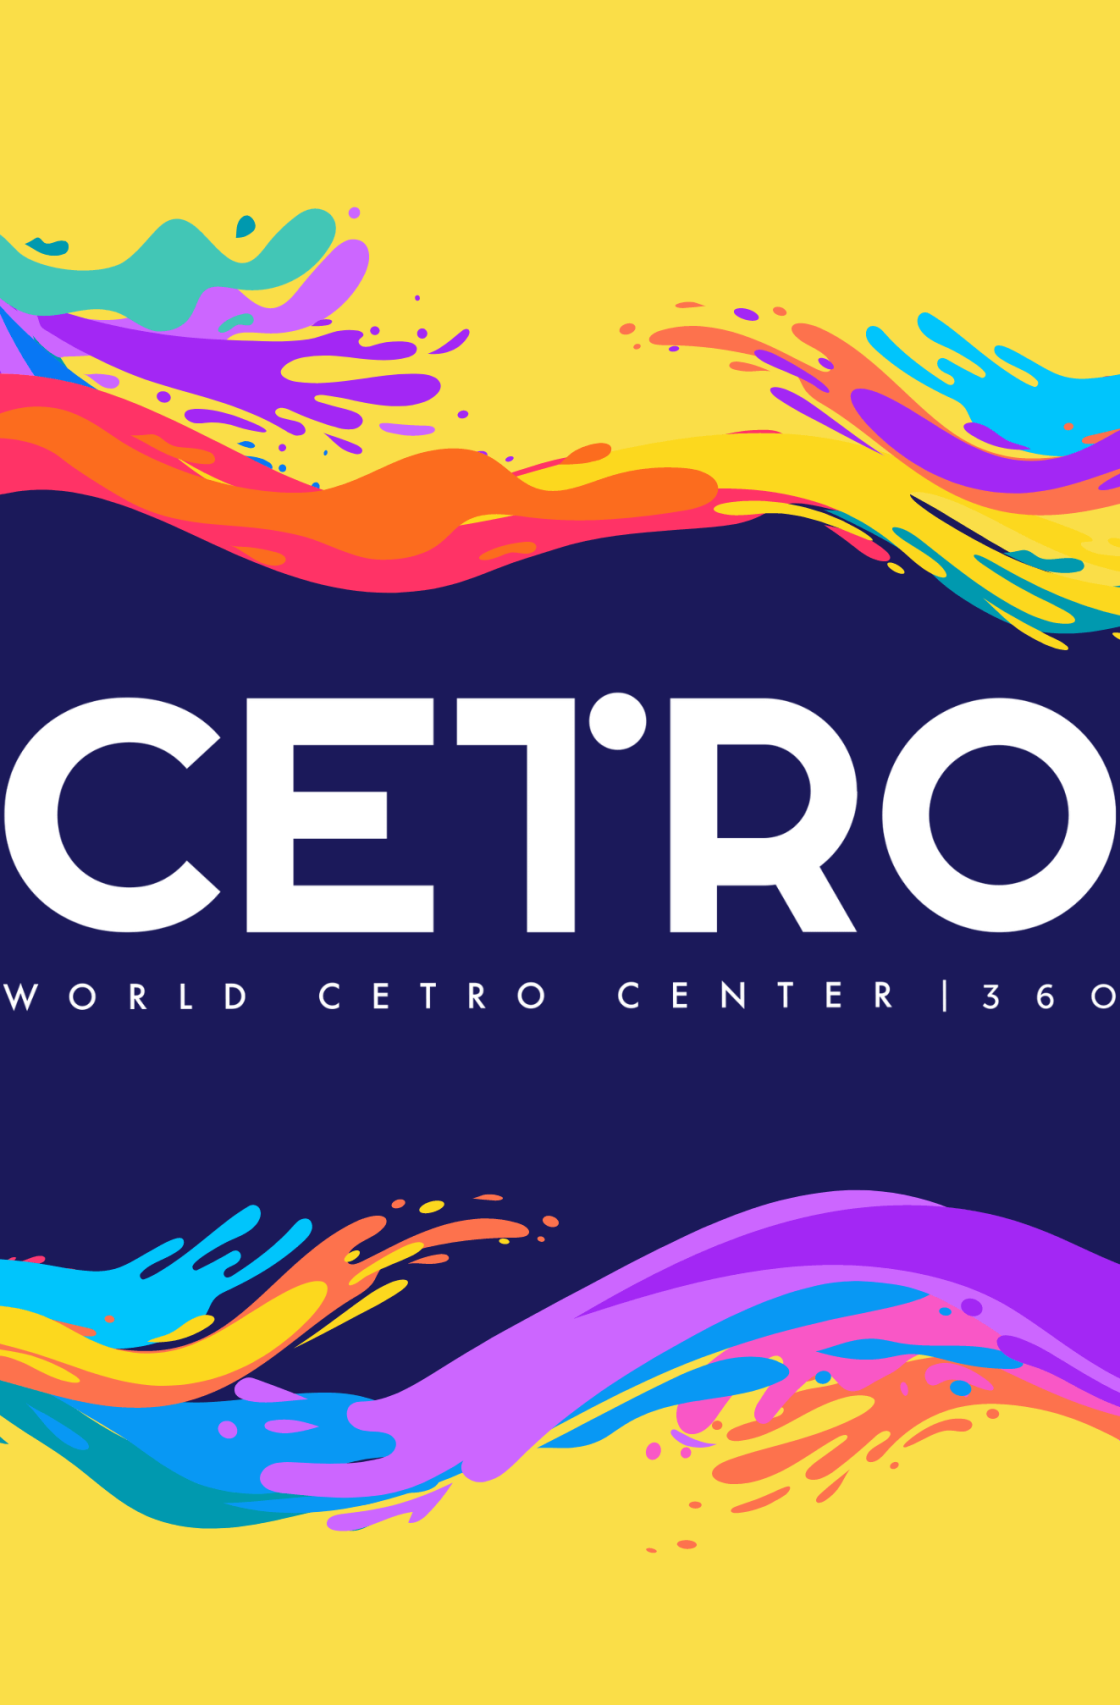 CETRO uses augmented reality for tourism in Mexico